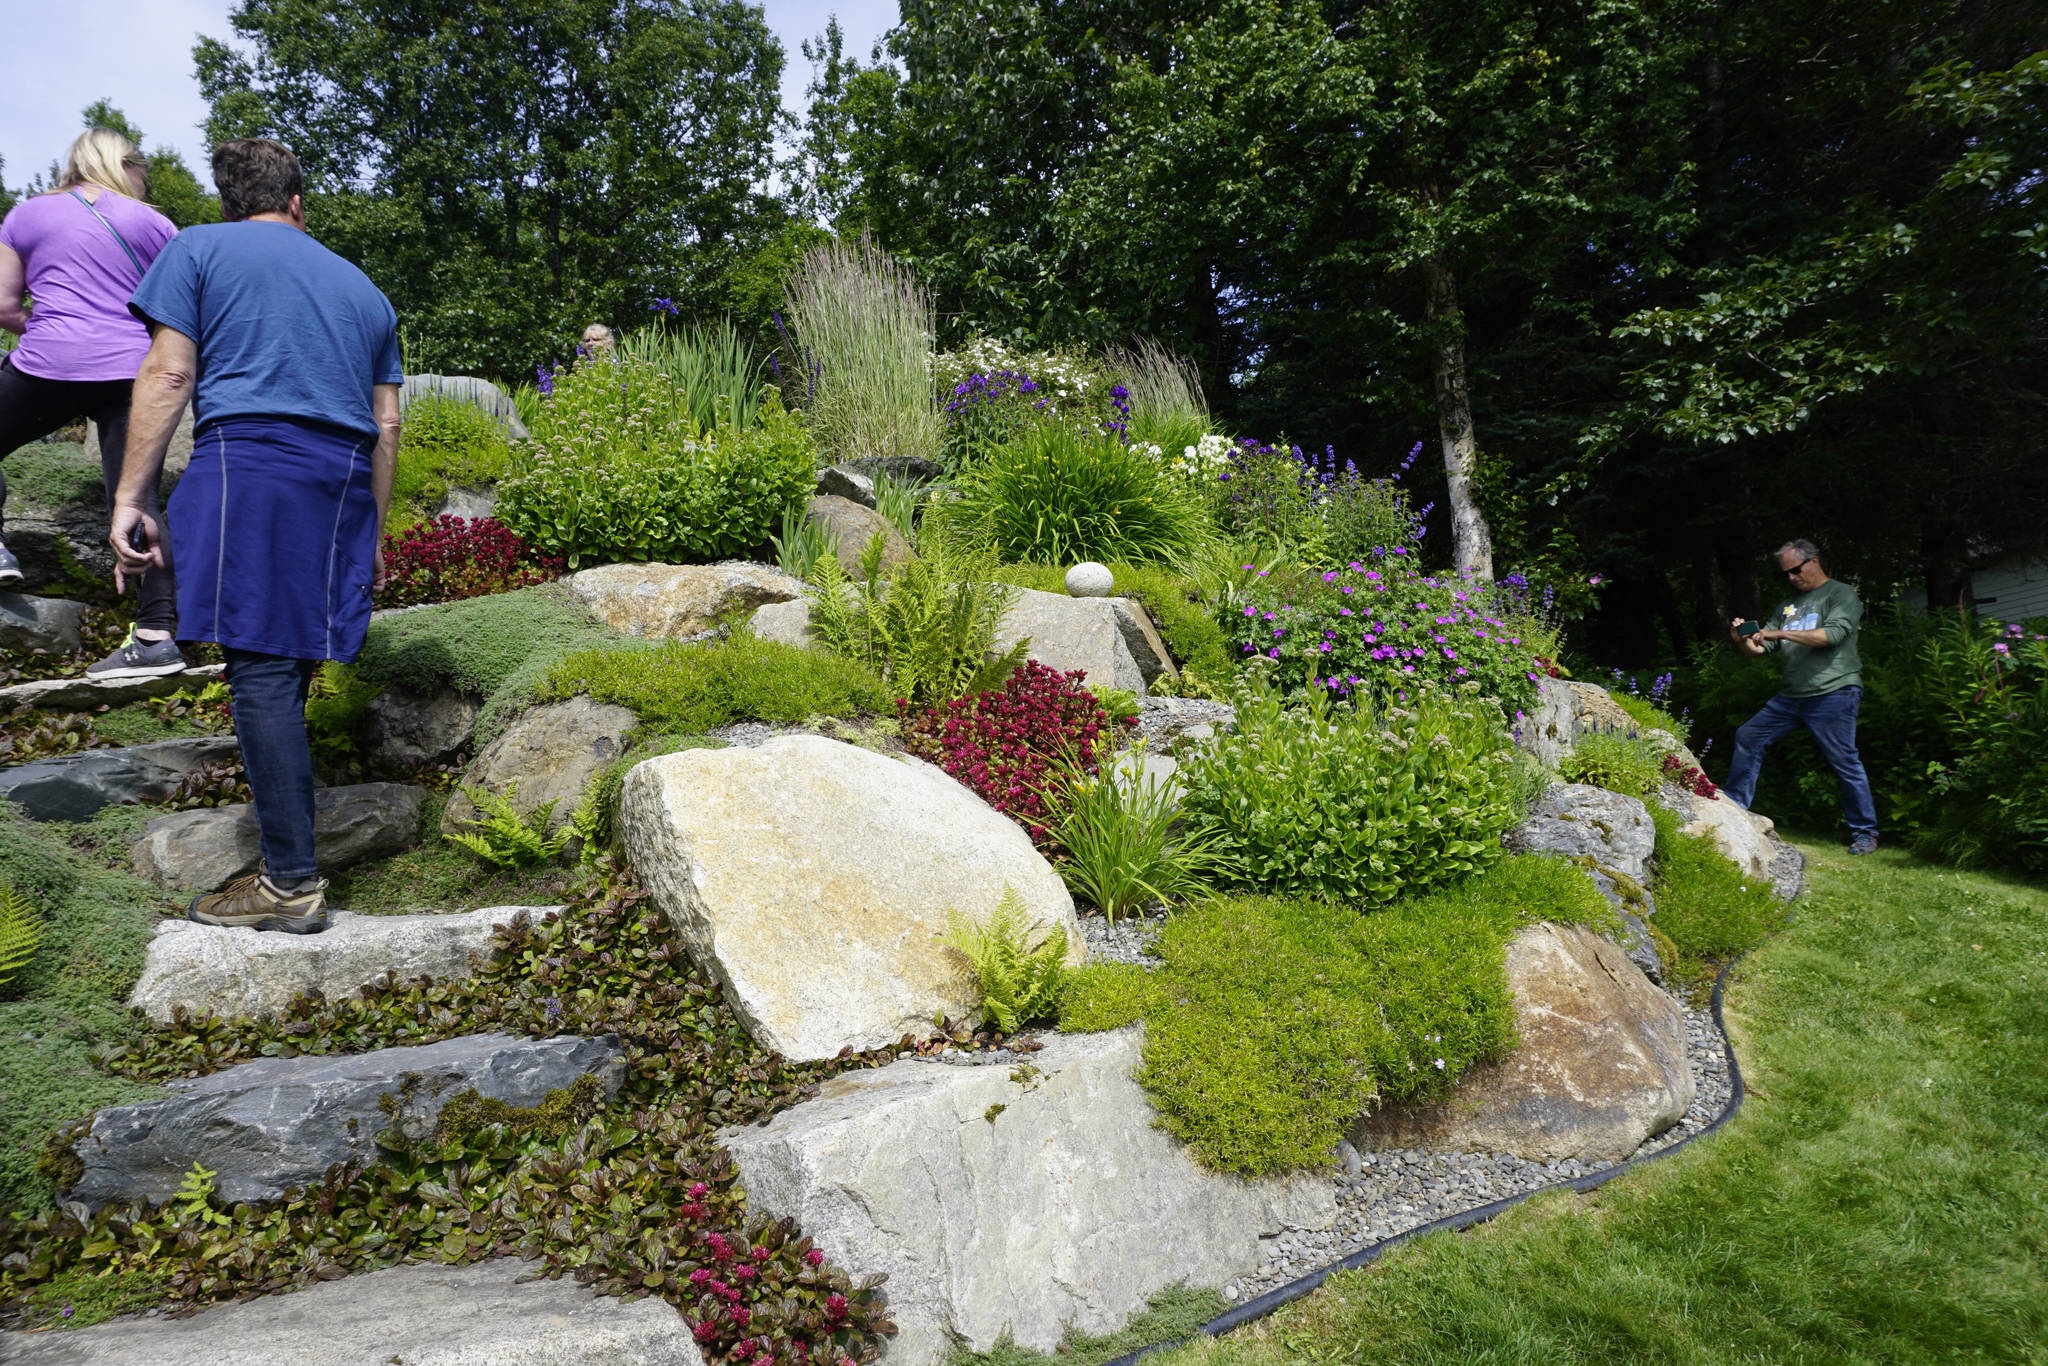 Steps are incorporated into the rock garden at the Flip and Marguerite Felton home off East Hill Road in Homer, Alaska. It was one of five gardens featured in the July 29, 2018 Homer Garden Tour. (Photo by Michael Armstrong/Homer News)